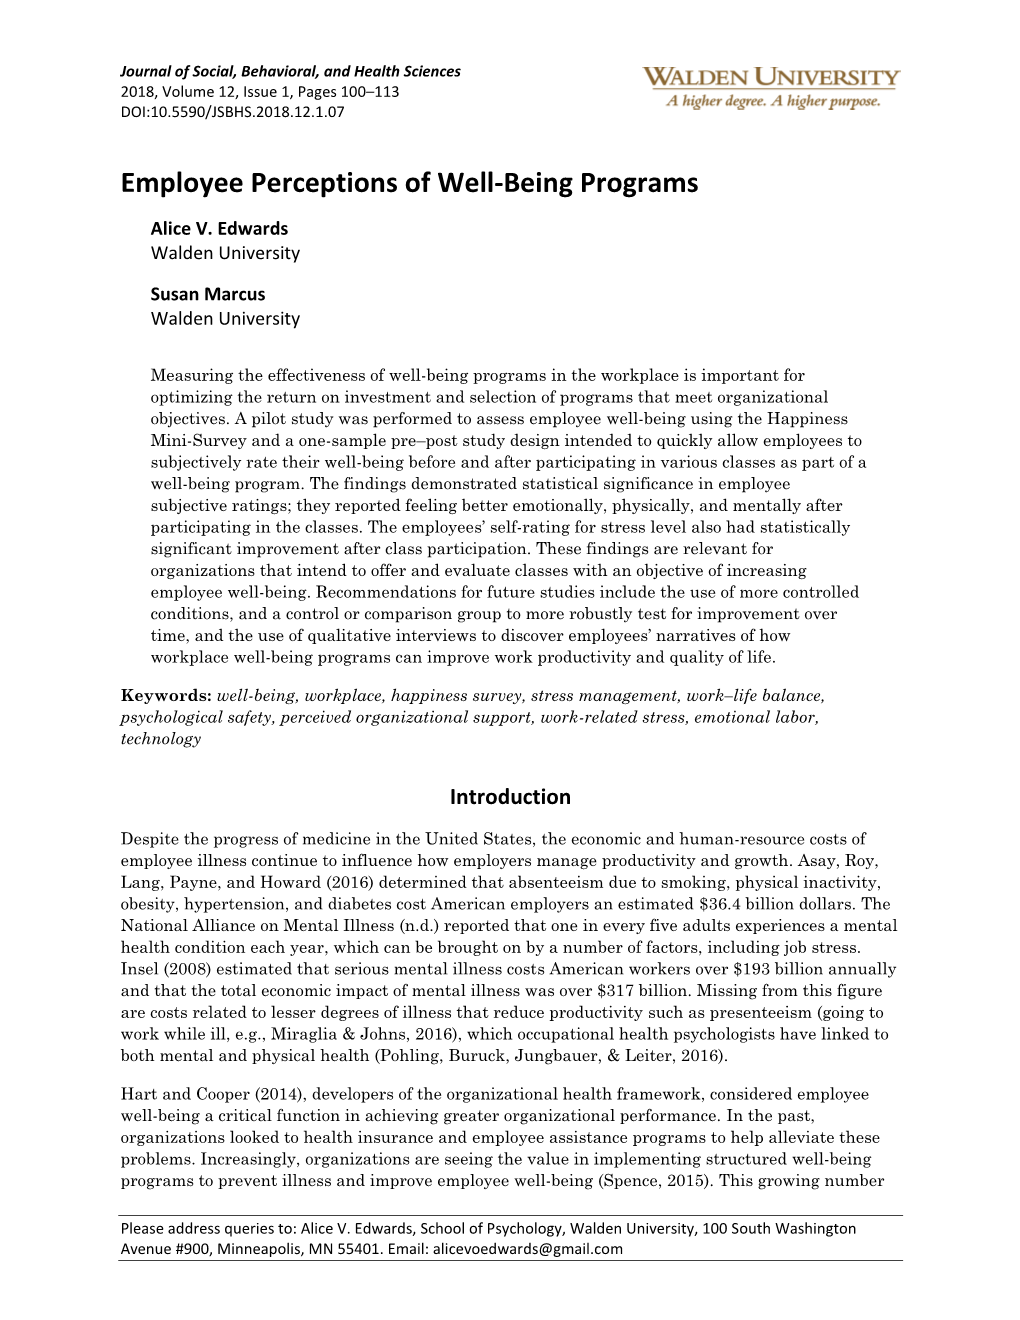 Employee Perceptions of Well-Being Programs